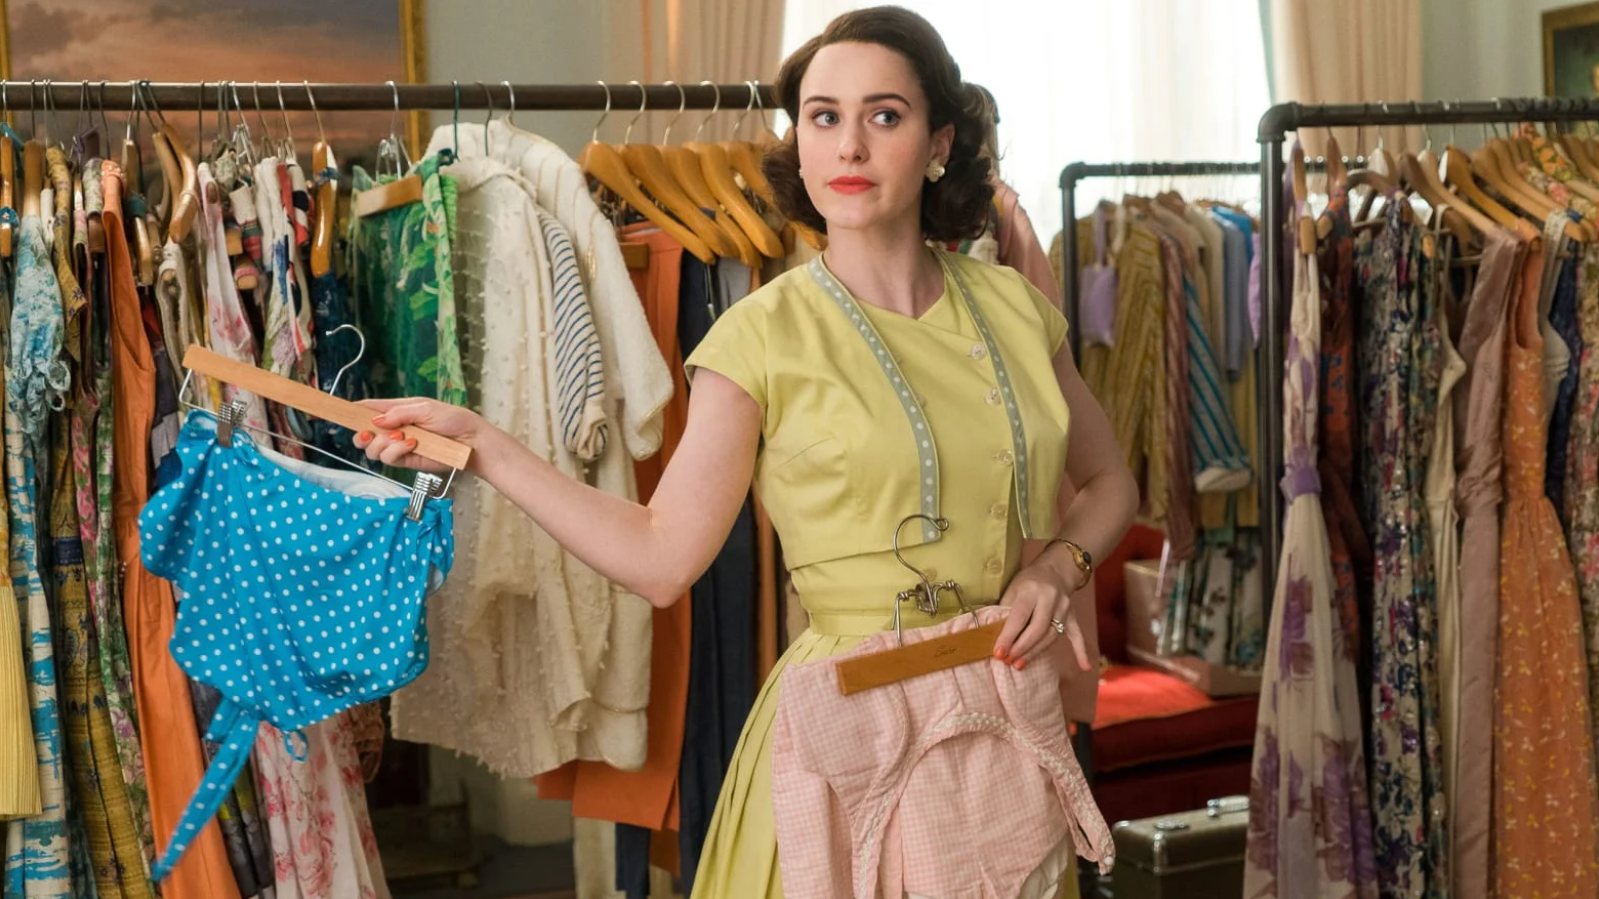 MADE LIKE MAISEL: Admiring The Marvelous Costumes One Stitch at a Time